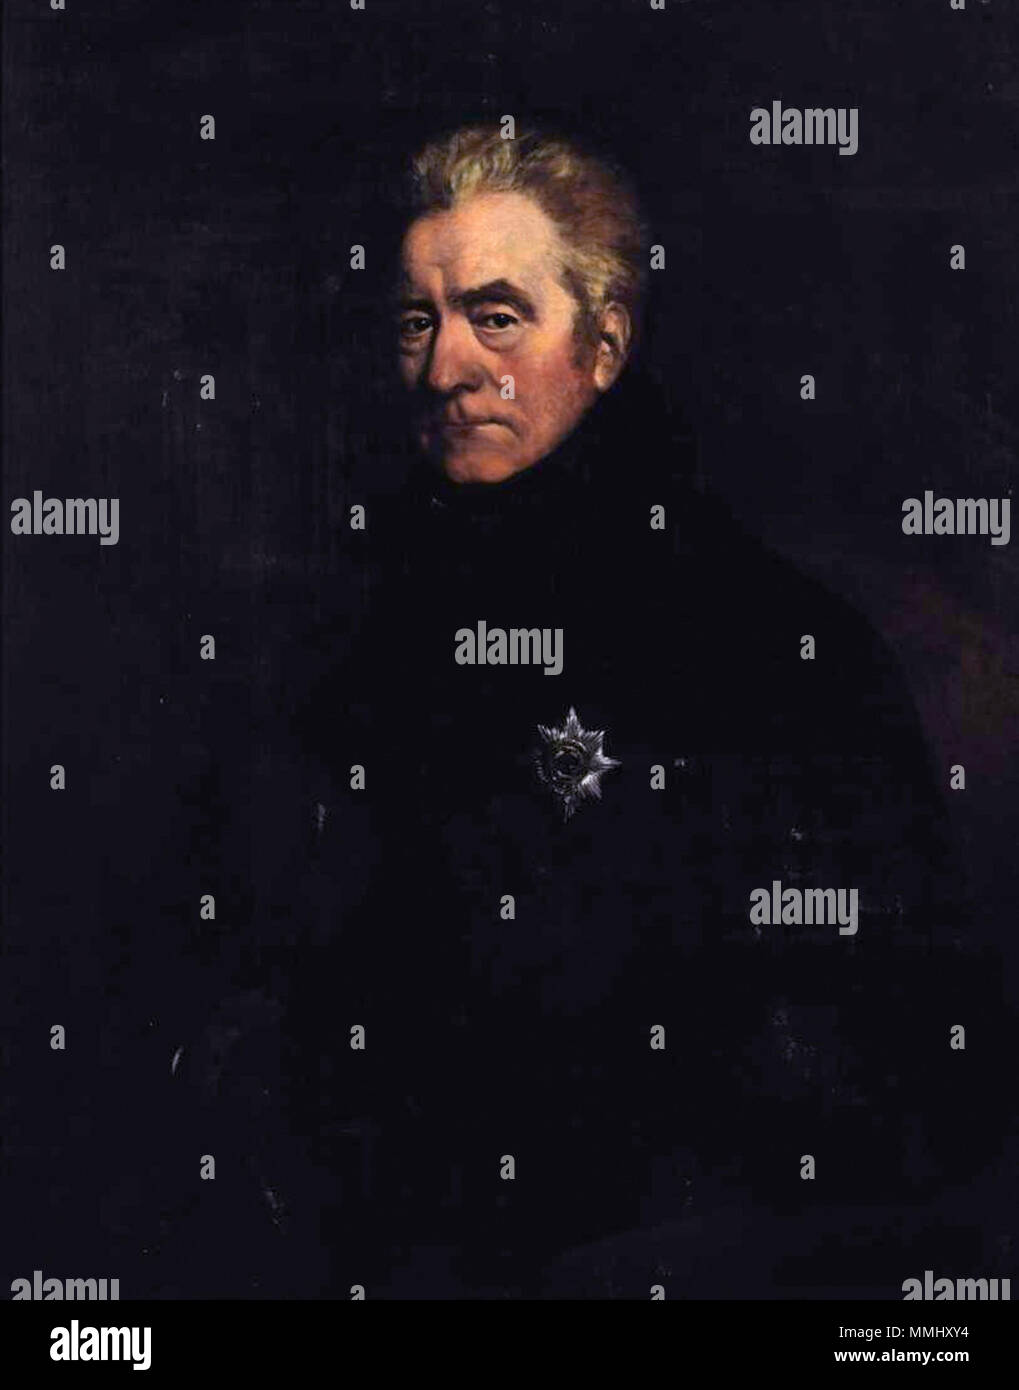 .  English: Portrait of George John, 2nd Earl Spencer, K.G. (1758-1834), wearing a black coat with a Garter Star  . circa 1833.   Adolfus Robert Venables  (1811–1892)    Alternative names Adolphus Robert Venables; Venables  Description British painter  Date of birth/death 1811 circa 1892  Work period 1842-1863  Authority control  : Q18507687 VIAF:?95682596 ULAN:?500000322 George John, 2nd Earl Spencer, K.G. (1758-1834), by Adolfus Rooert Venables Stock Photo